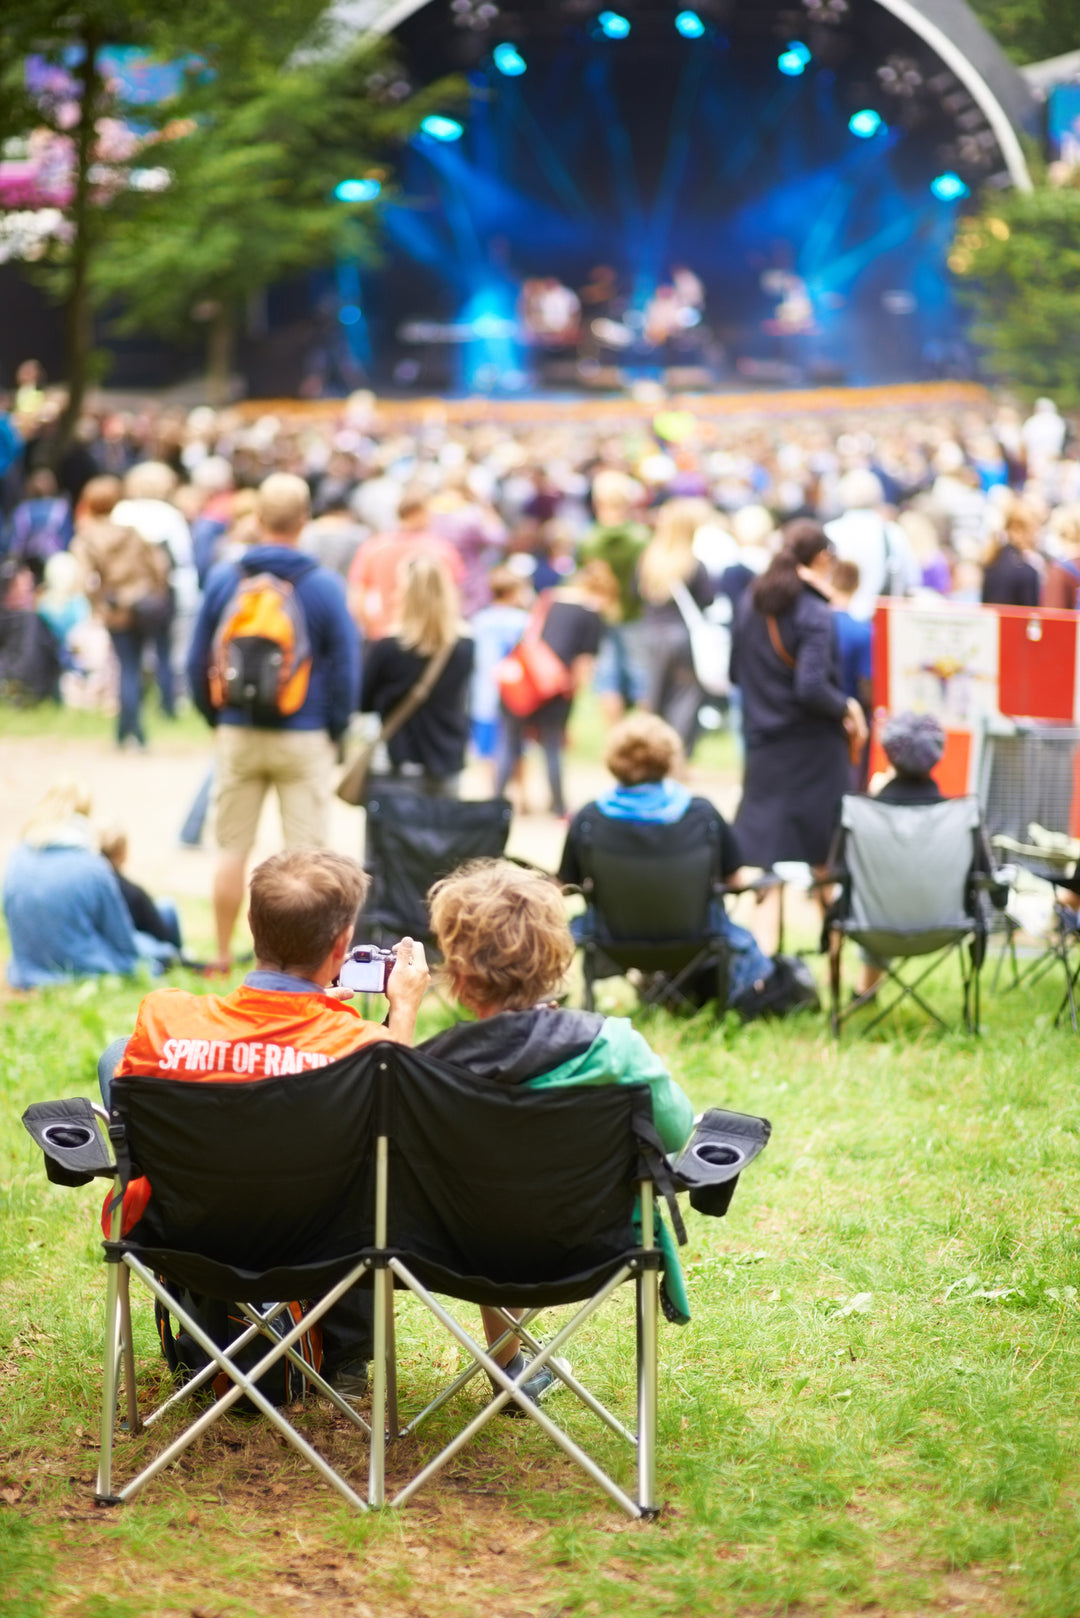 People sitting at an outdoor music festival.